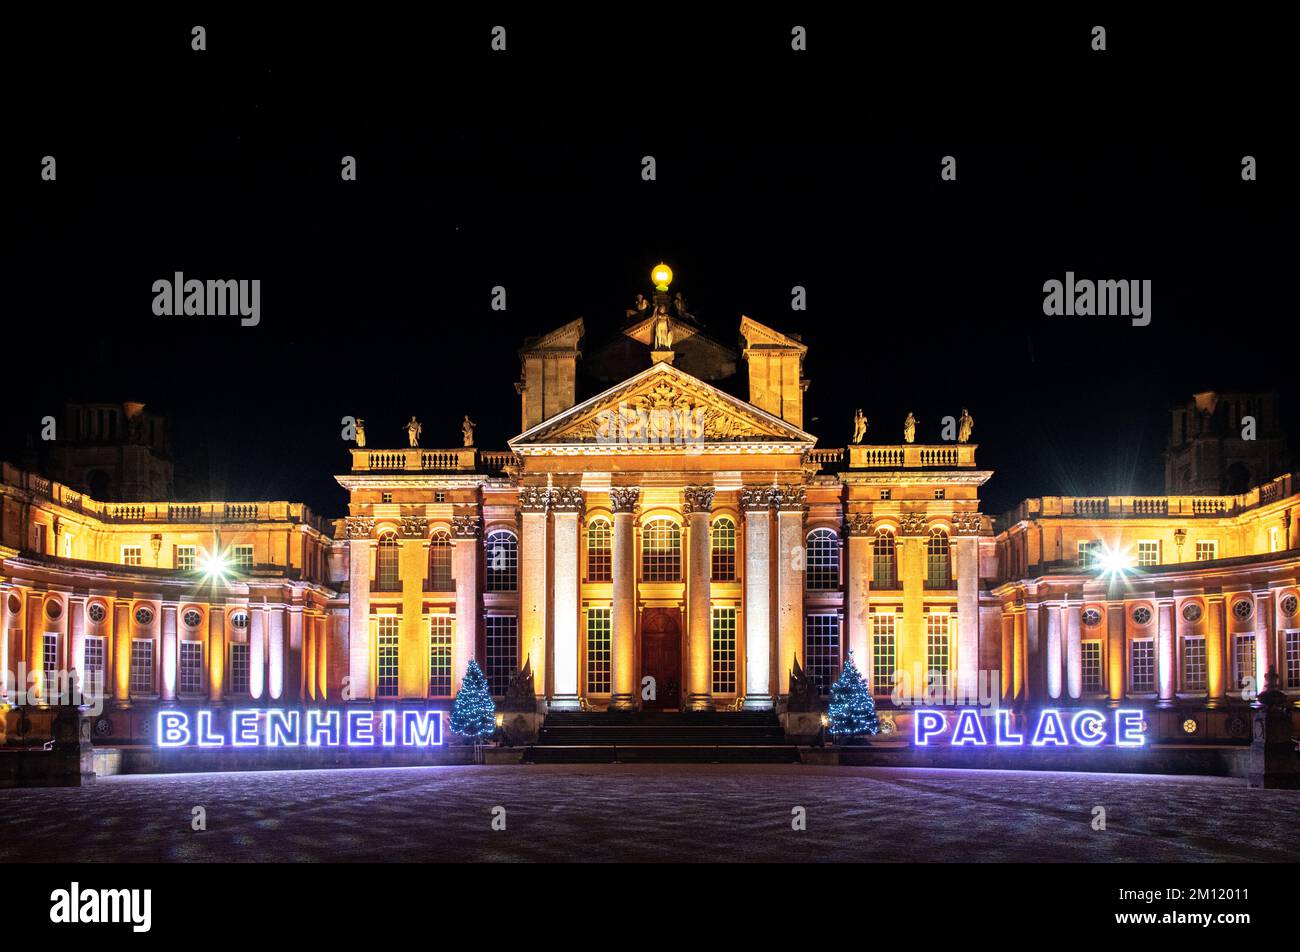 The palace at Blenheim illuminated with Christmas and winter lights. Stock Photo